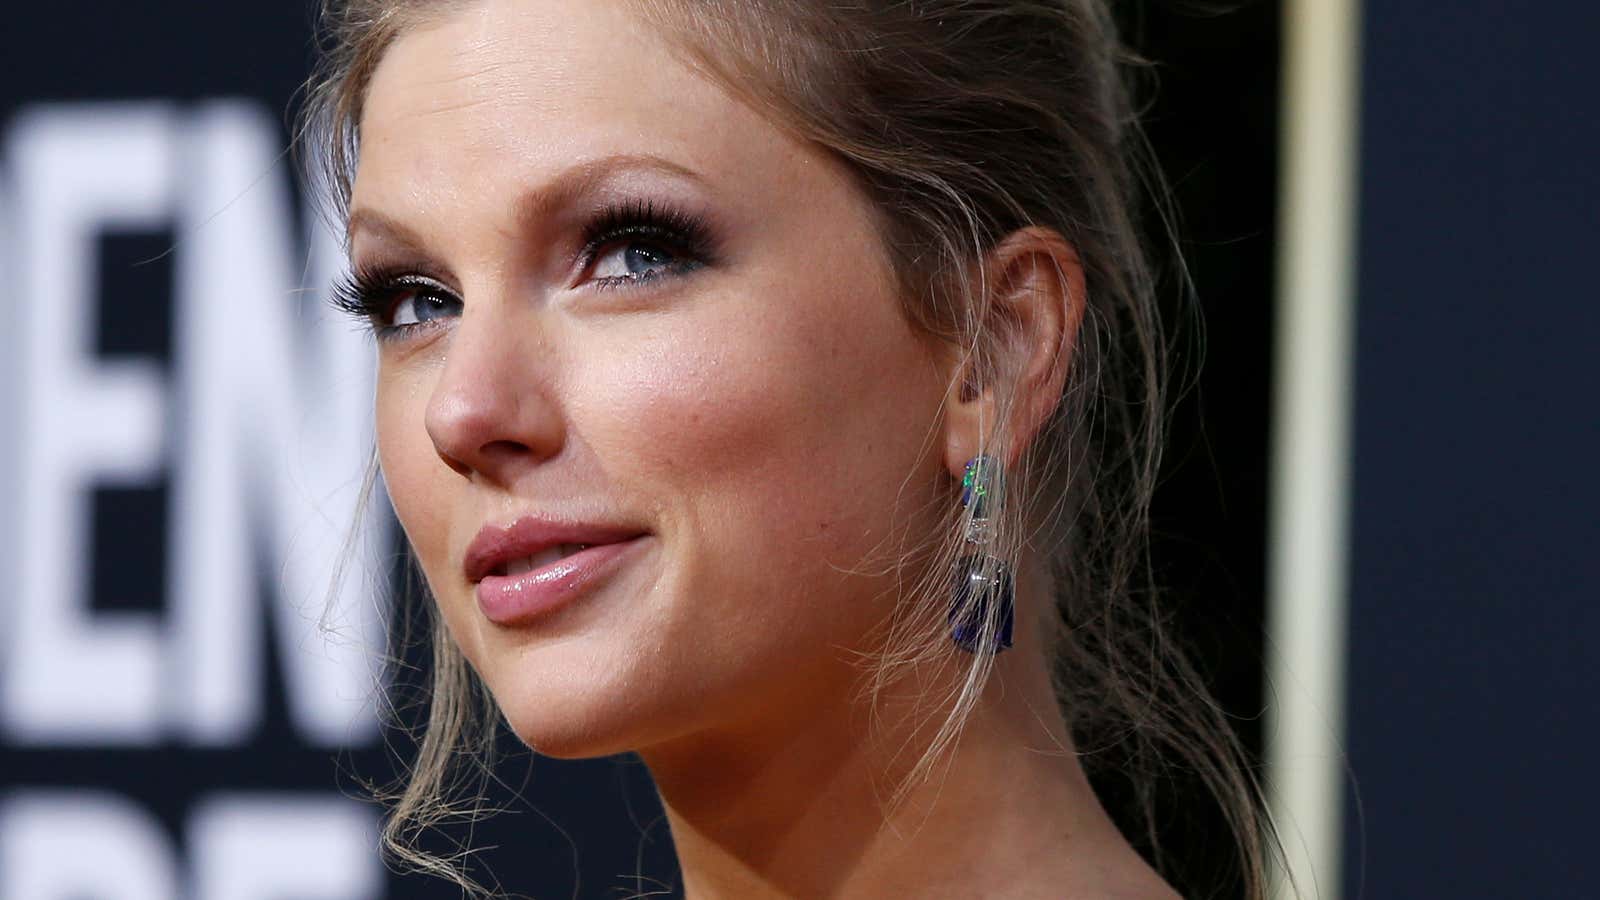 Hits from Top 40 stars like Taylor Swift are becoming less important on Spotify.